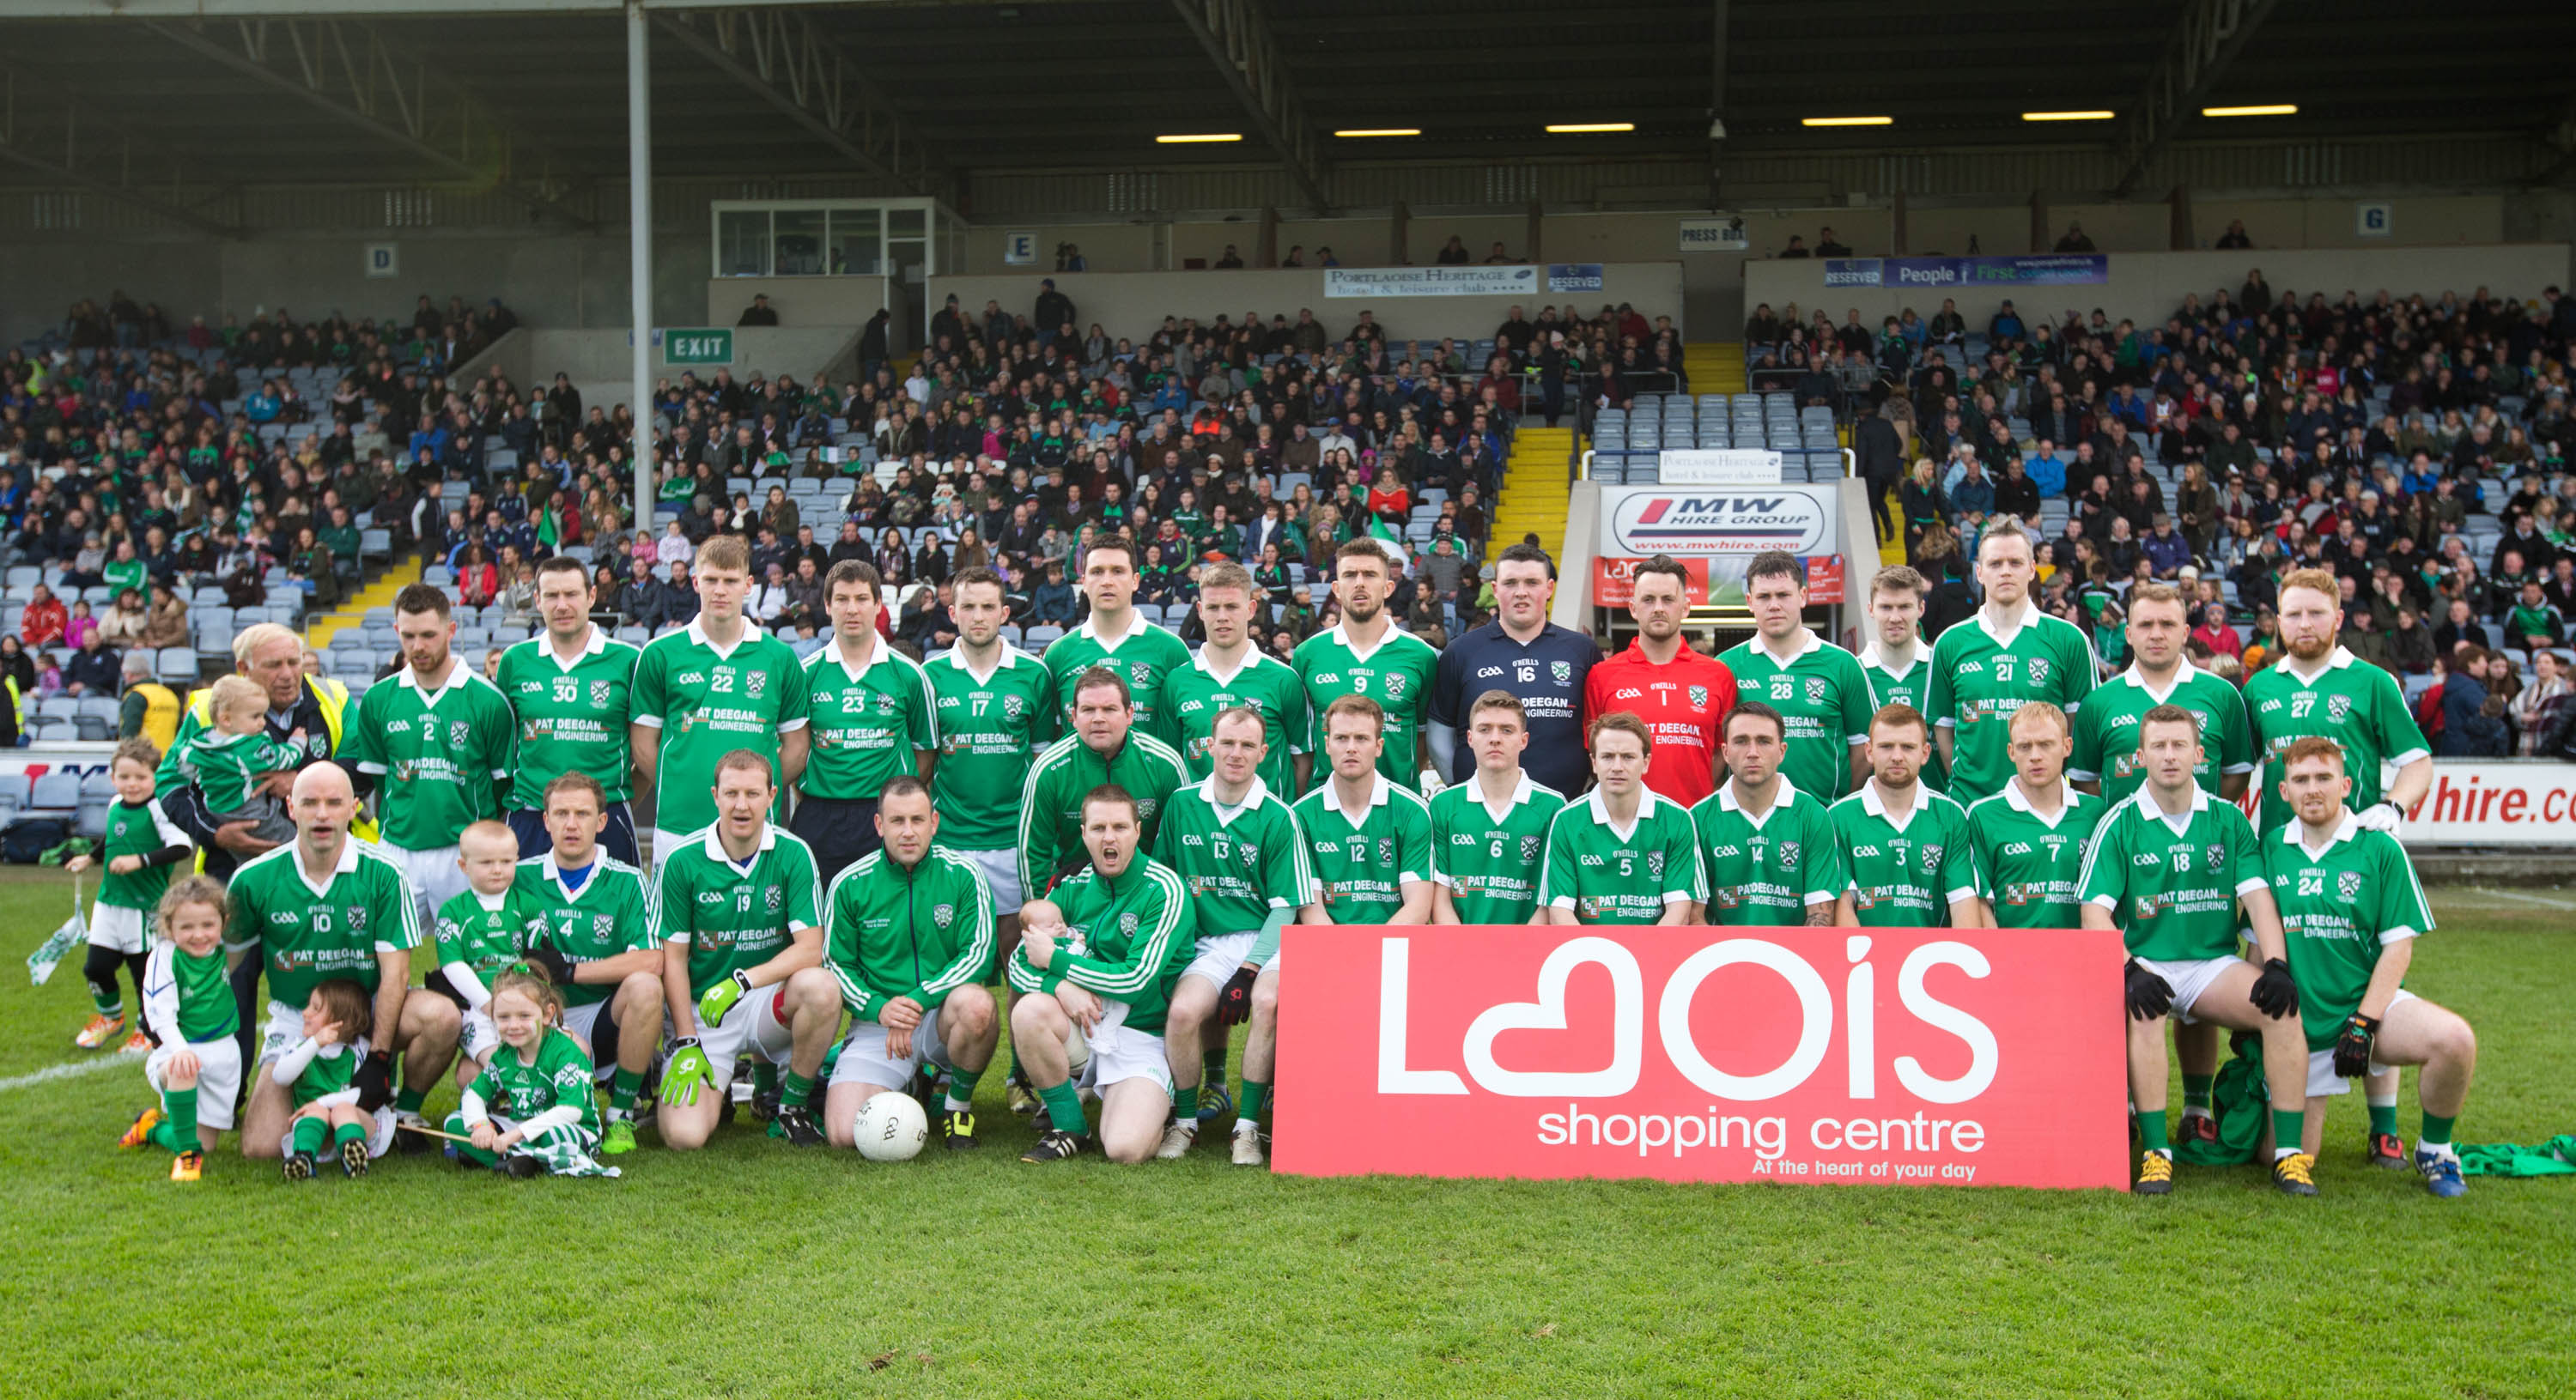 Stradbally who defeated Portlaoise in the SFC final - they sit high up in our rankings